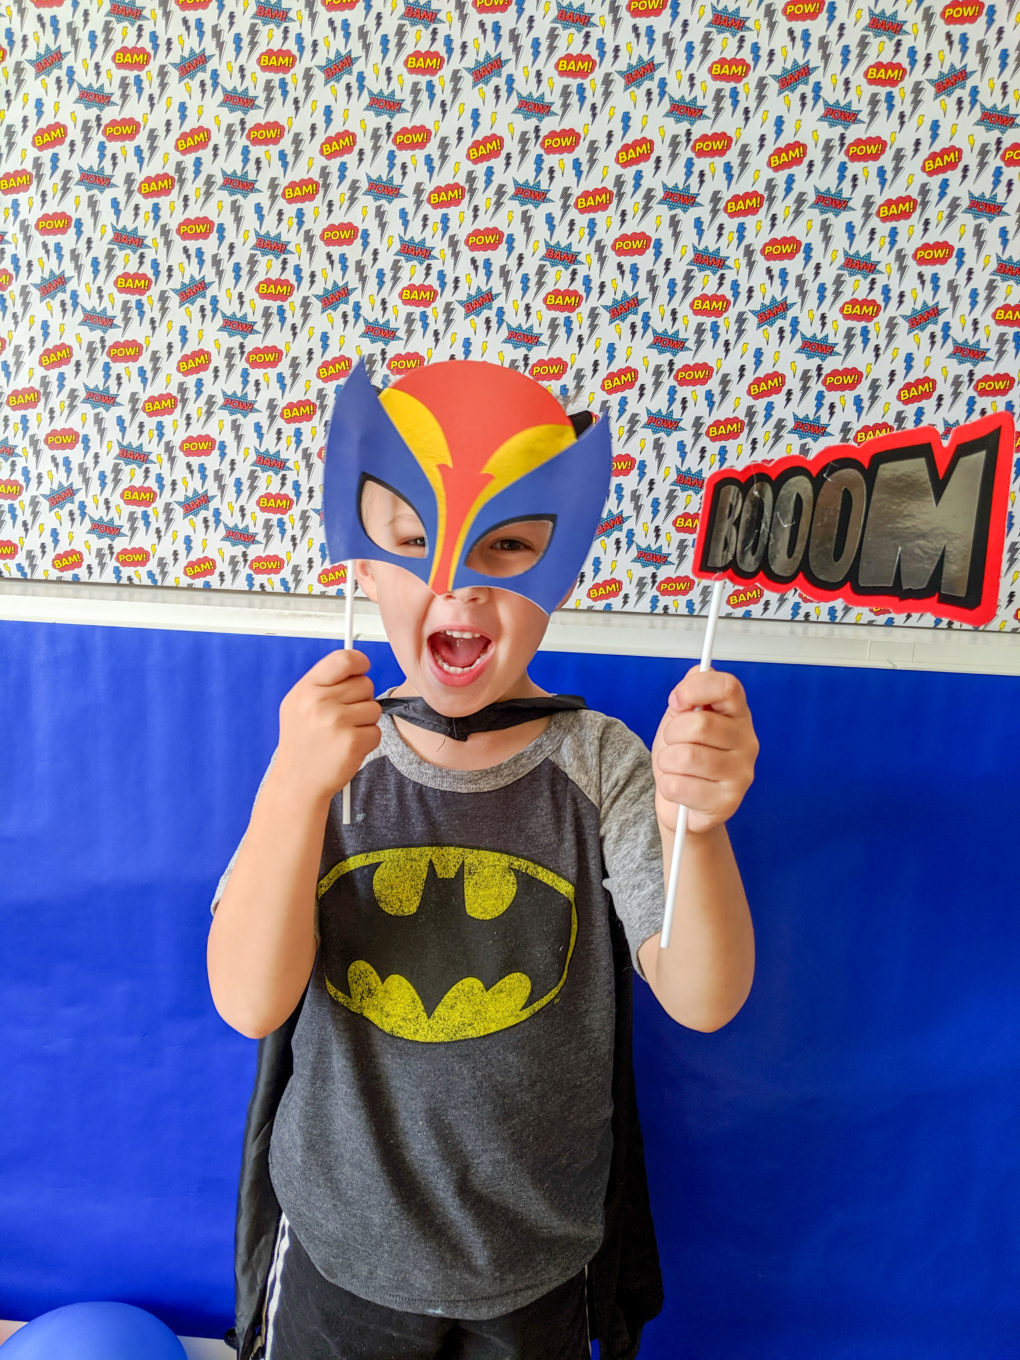 Superhero party activity - superhero DIY photo booth and photo wall with props. 